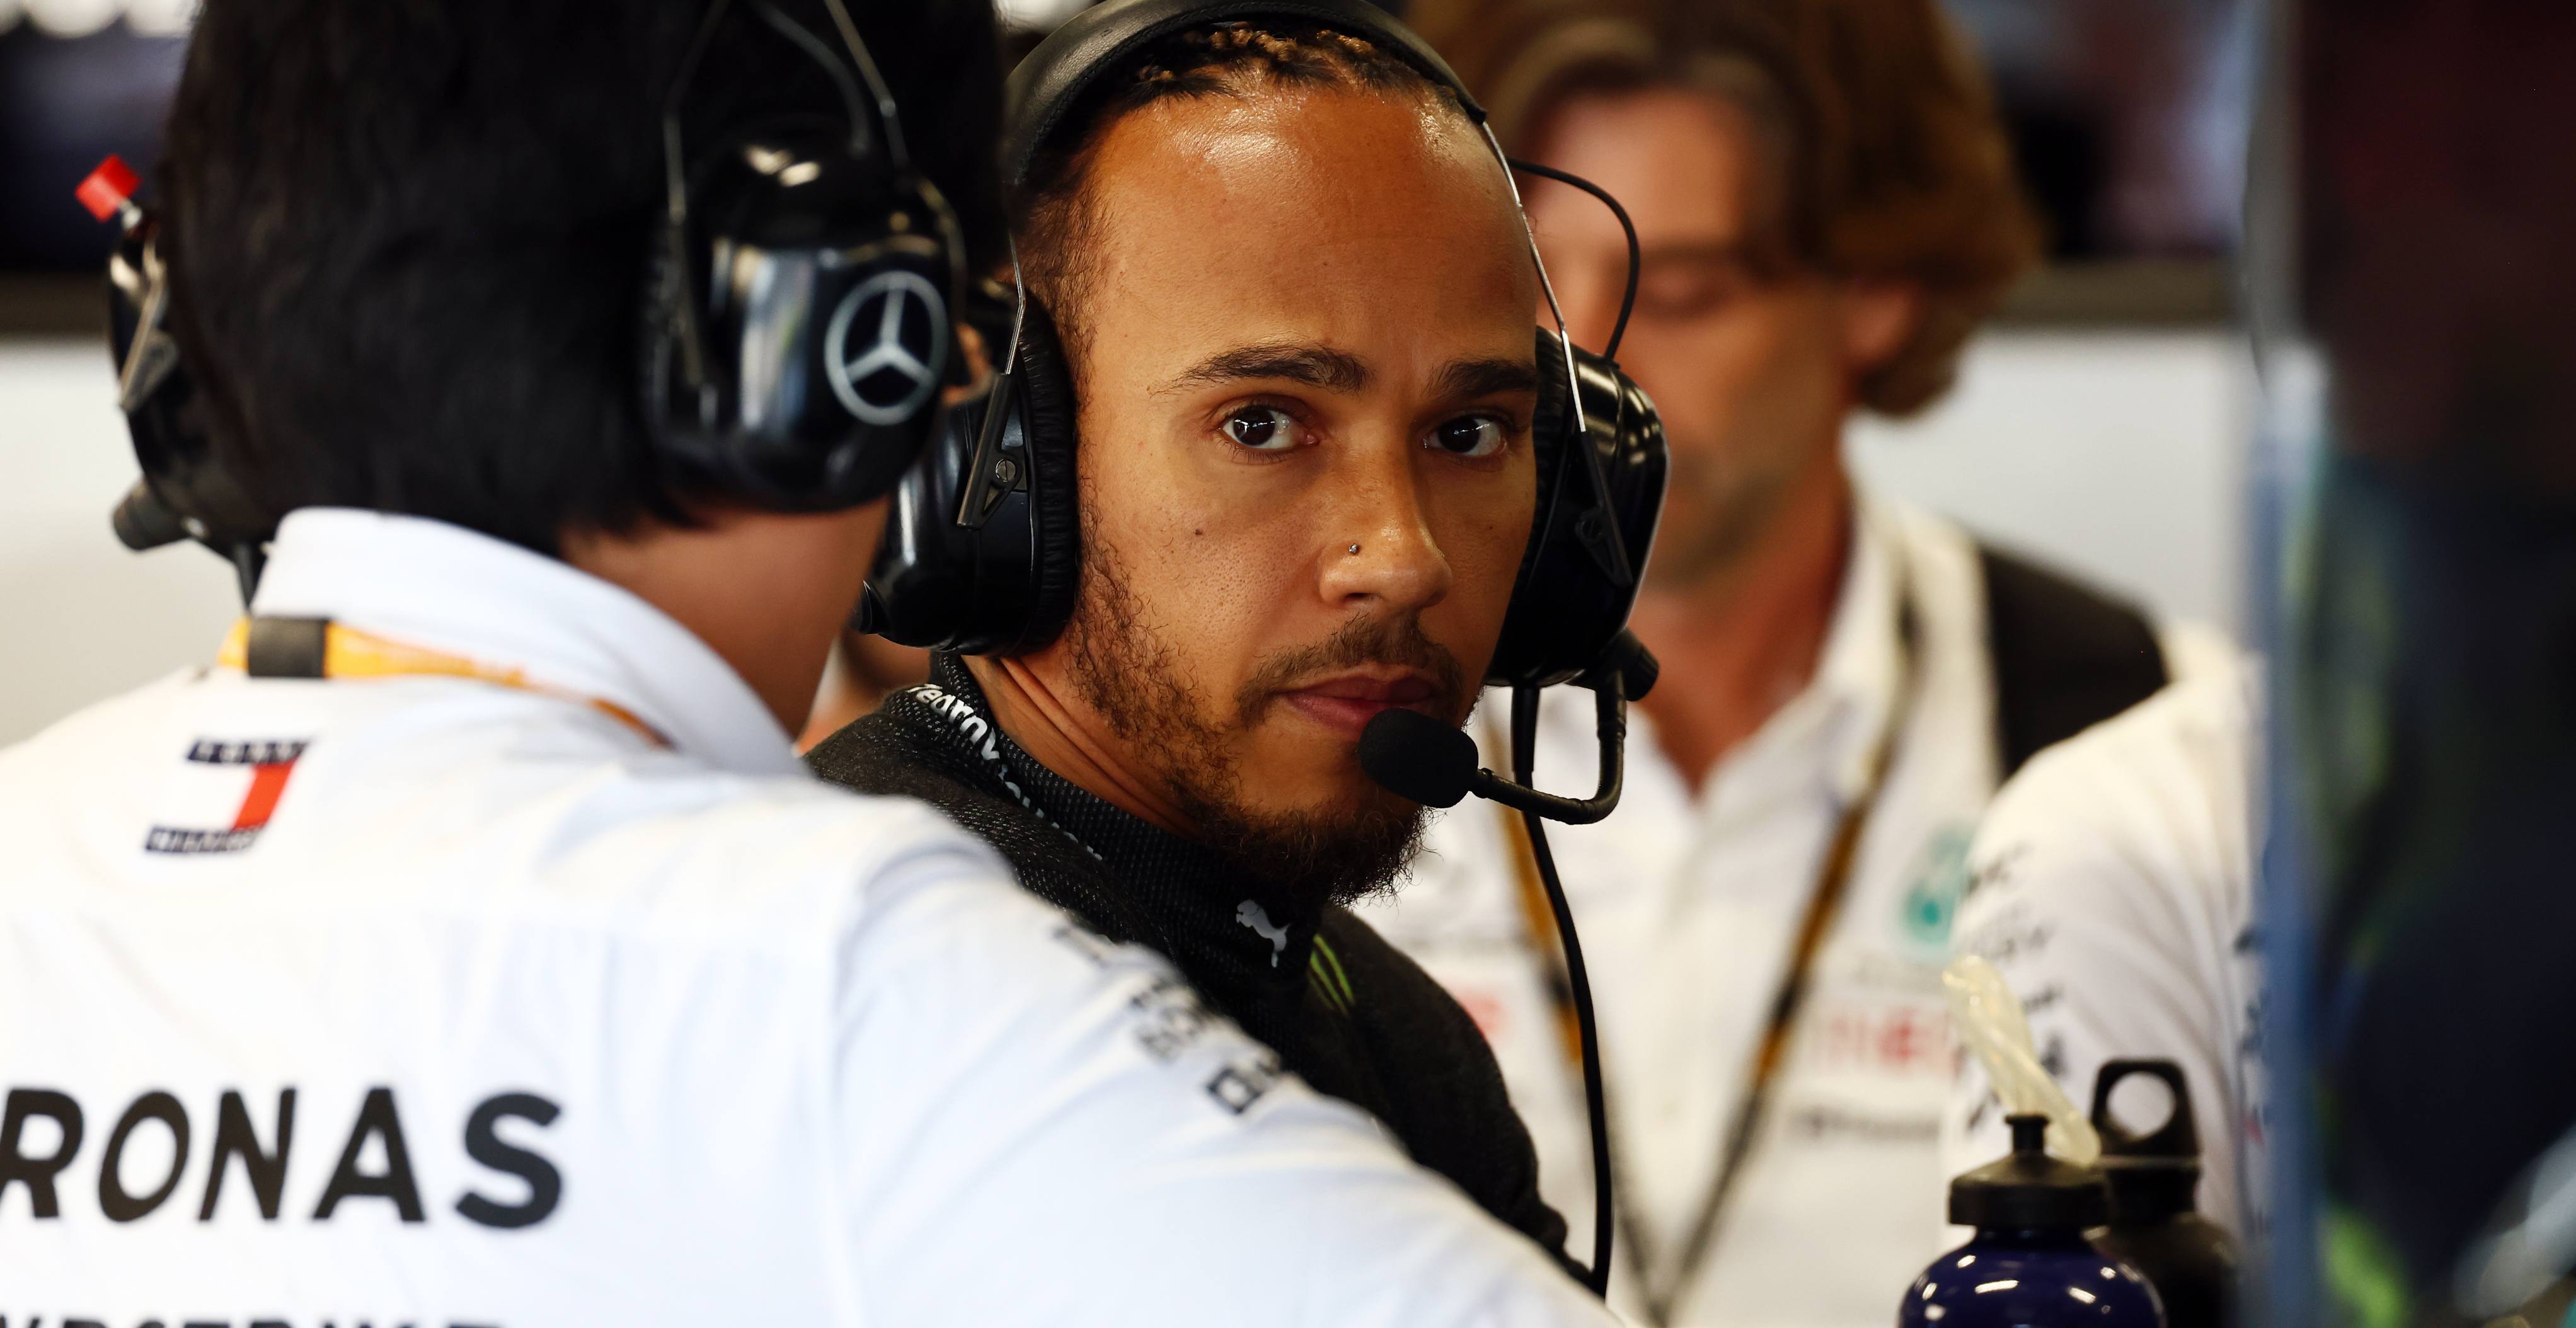 Hamilton says he knew 'from the moment I the drove car' that W14 would need  work